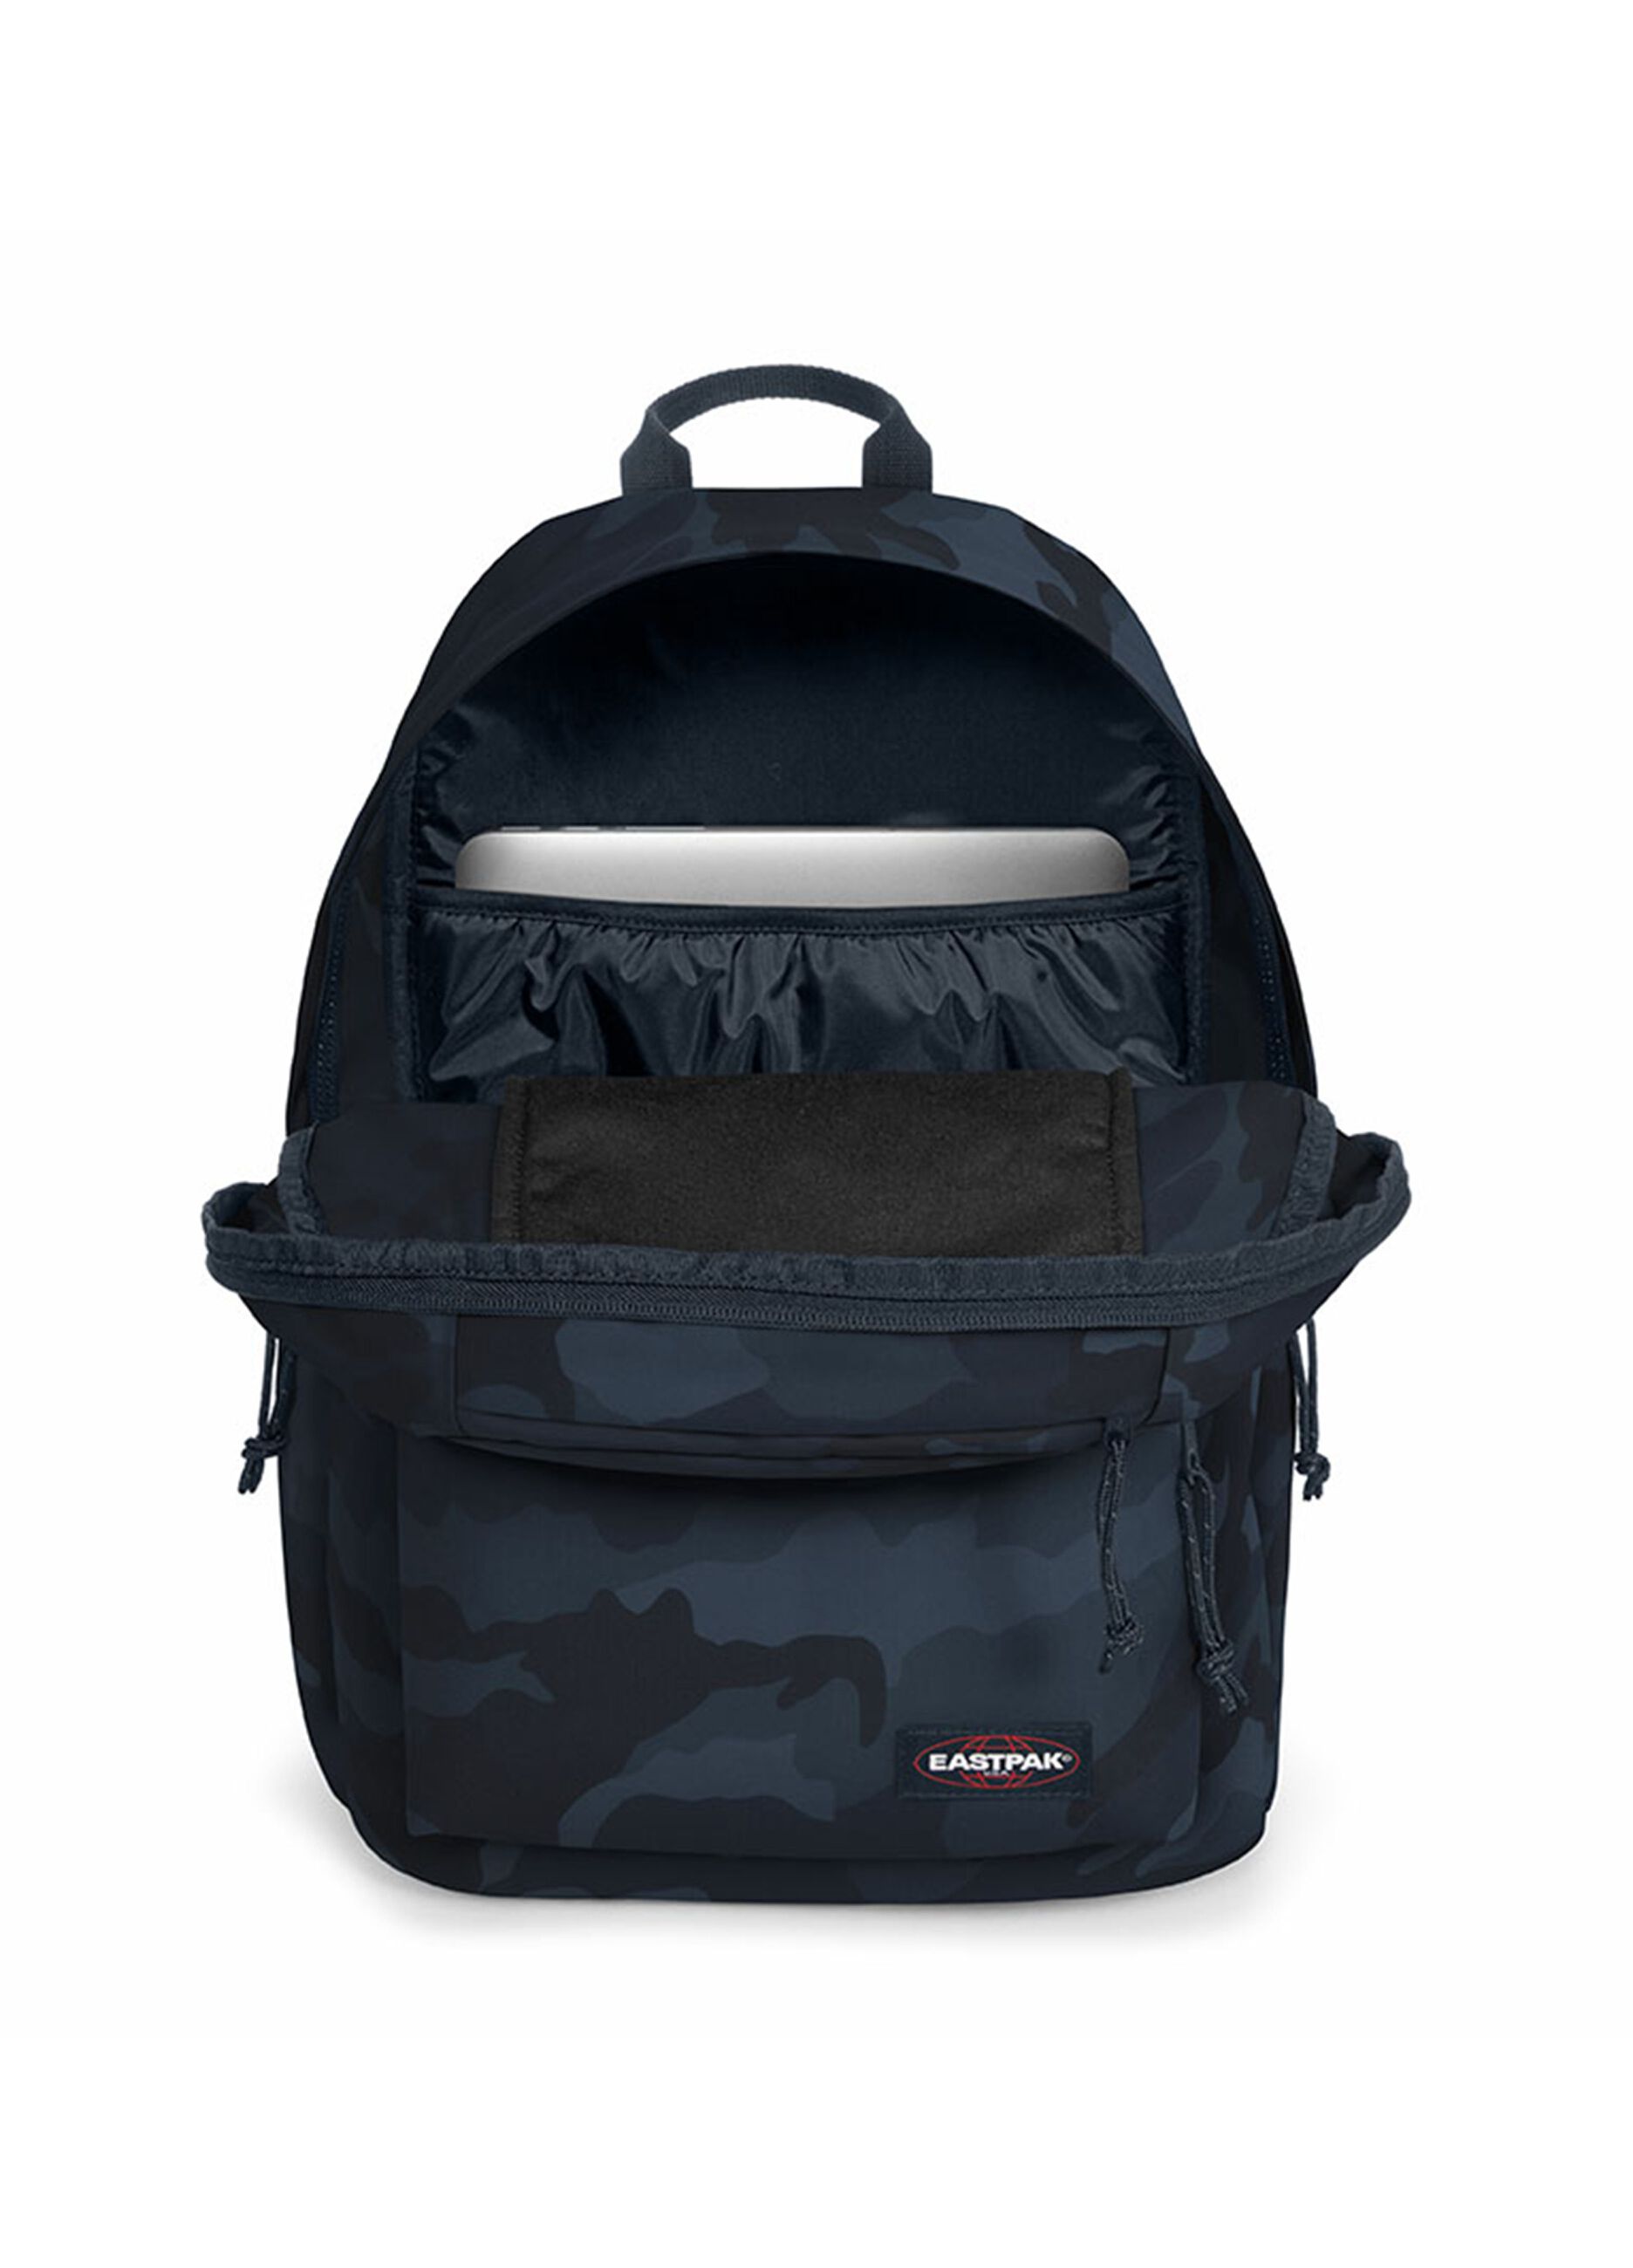 Eastpak Padded Double camouflage backpack